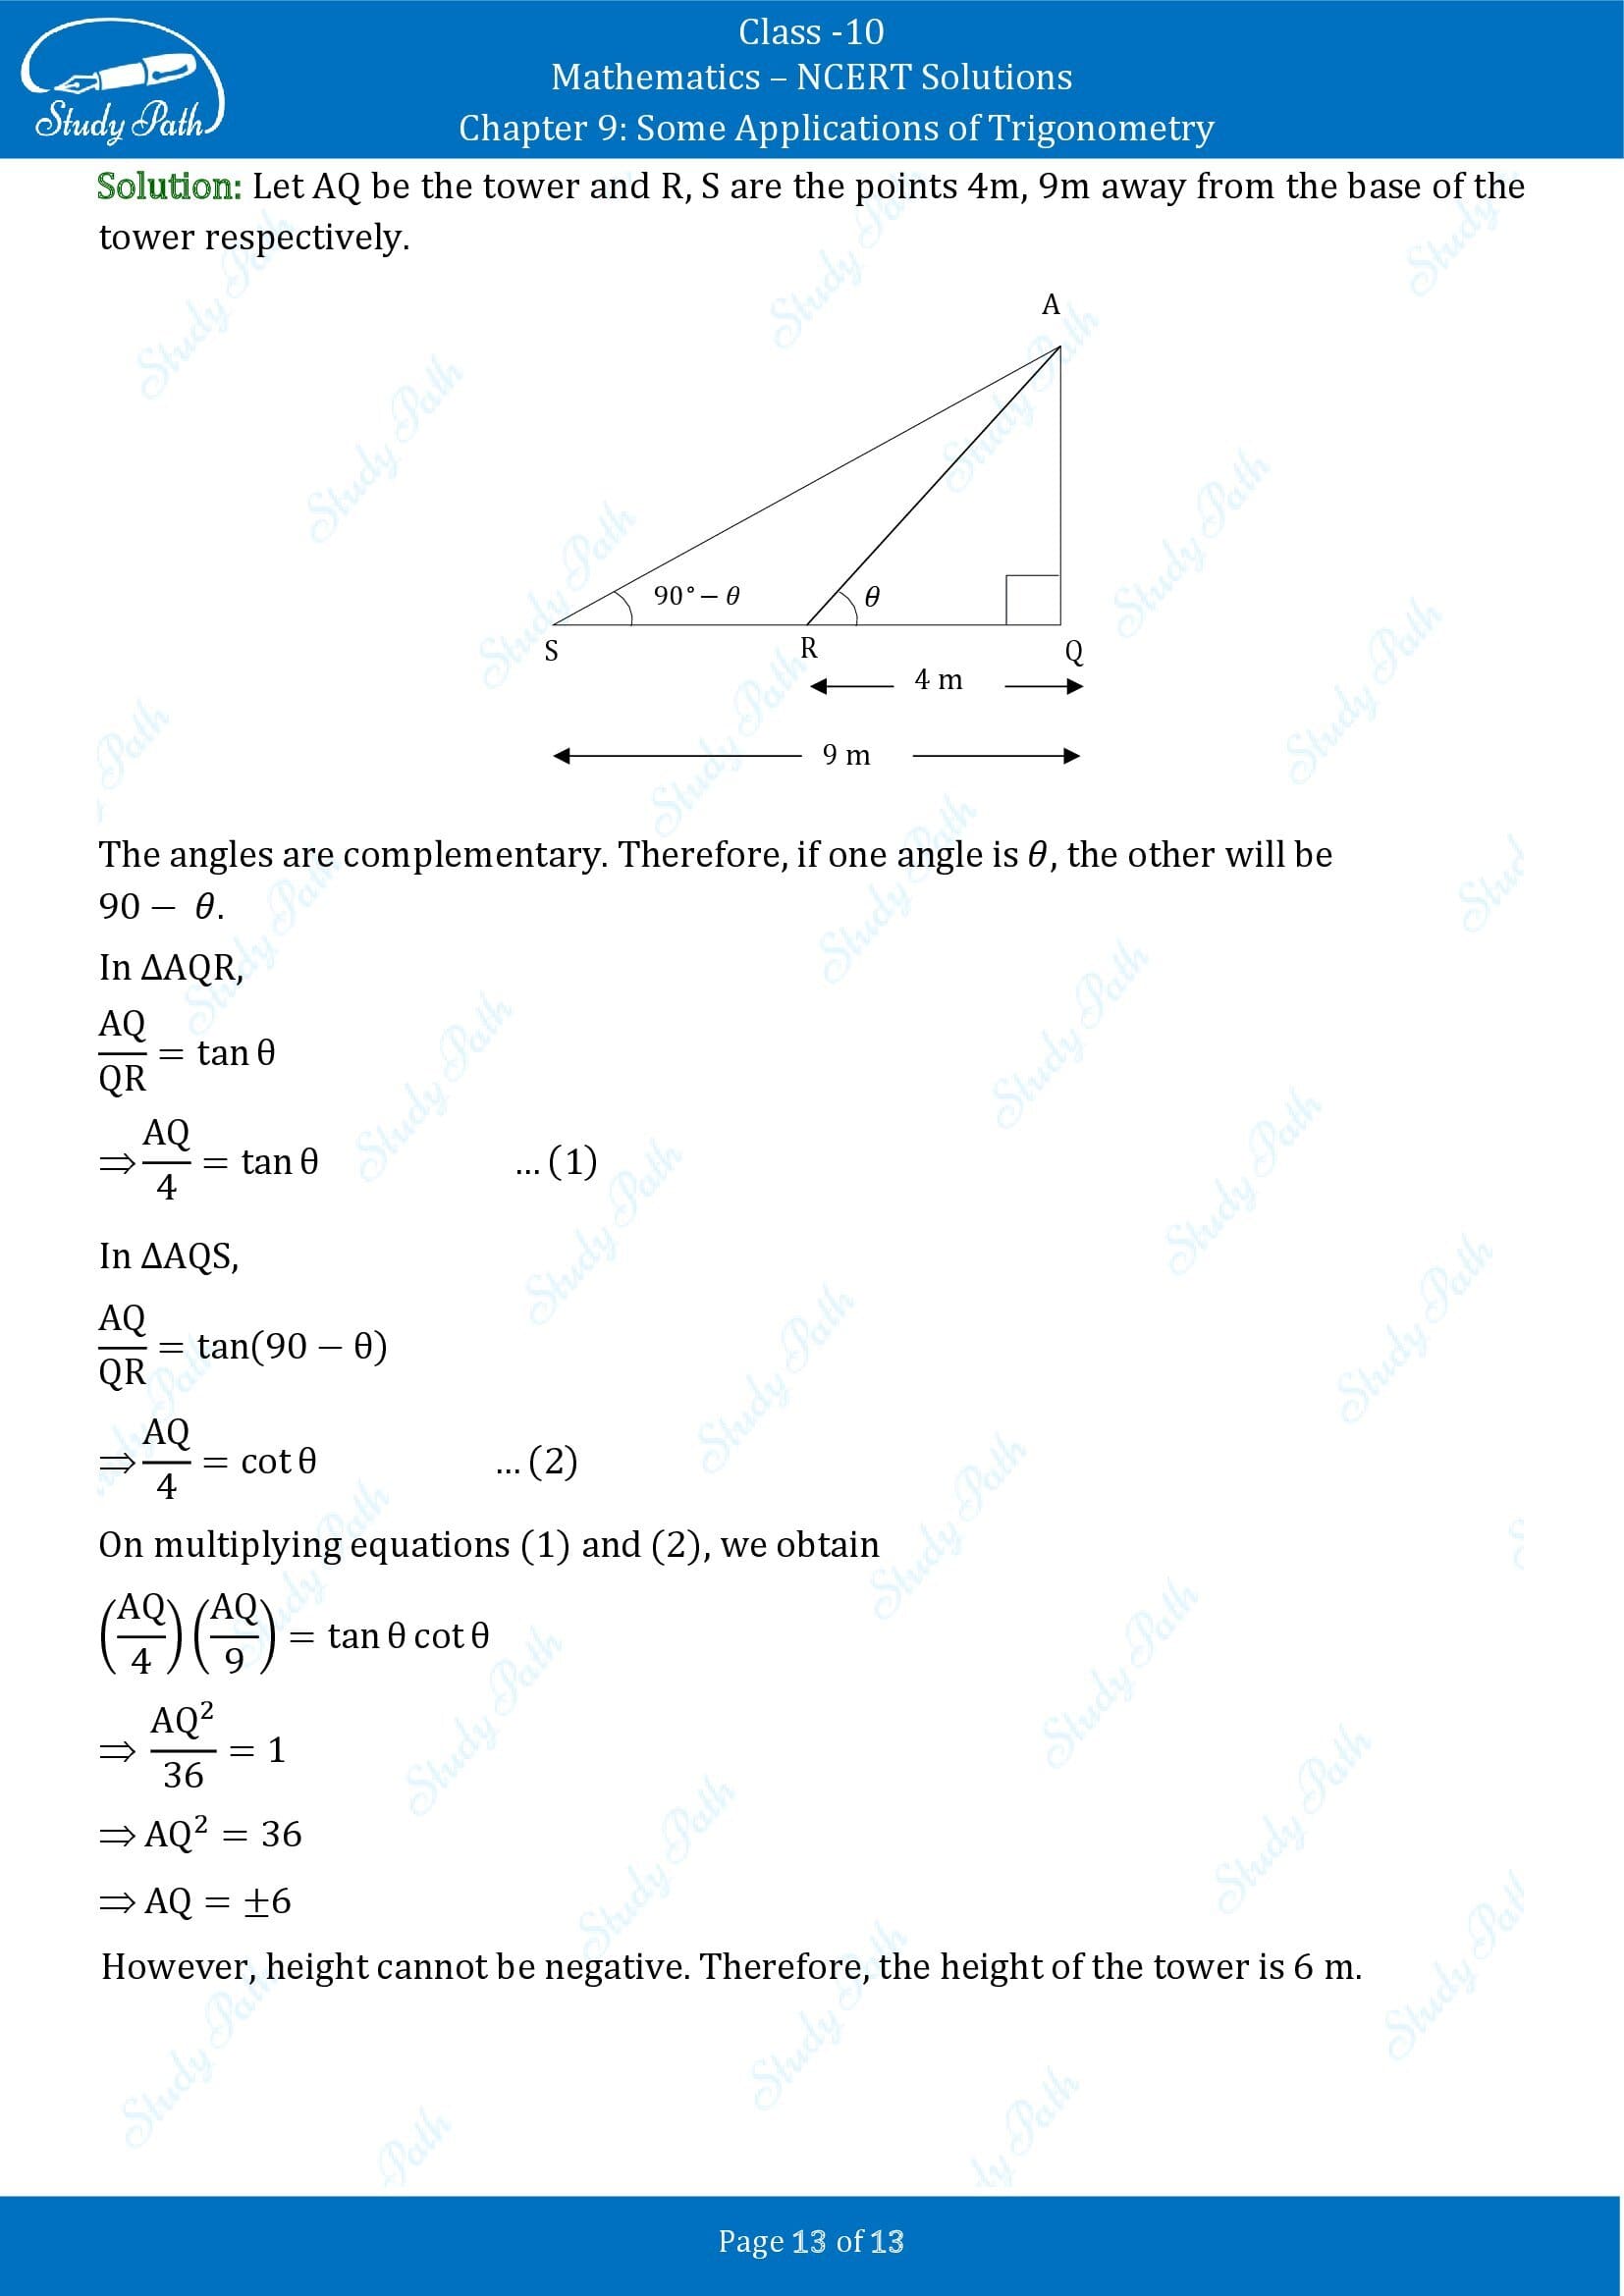 NCERT Solutions for Class 10 Maths Chapter 9 Some Applications of Trigonometry 00013